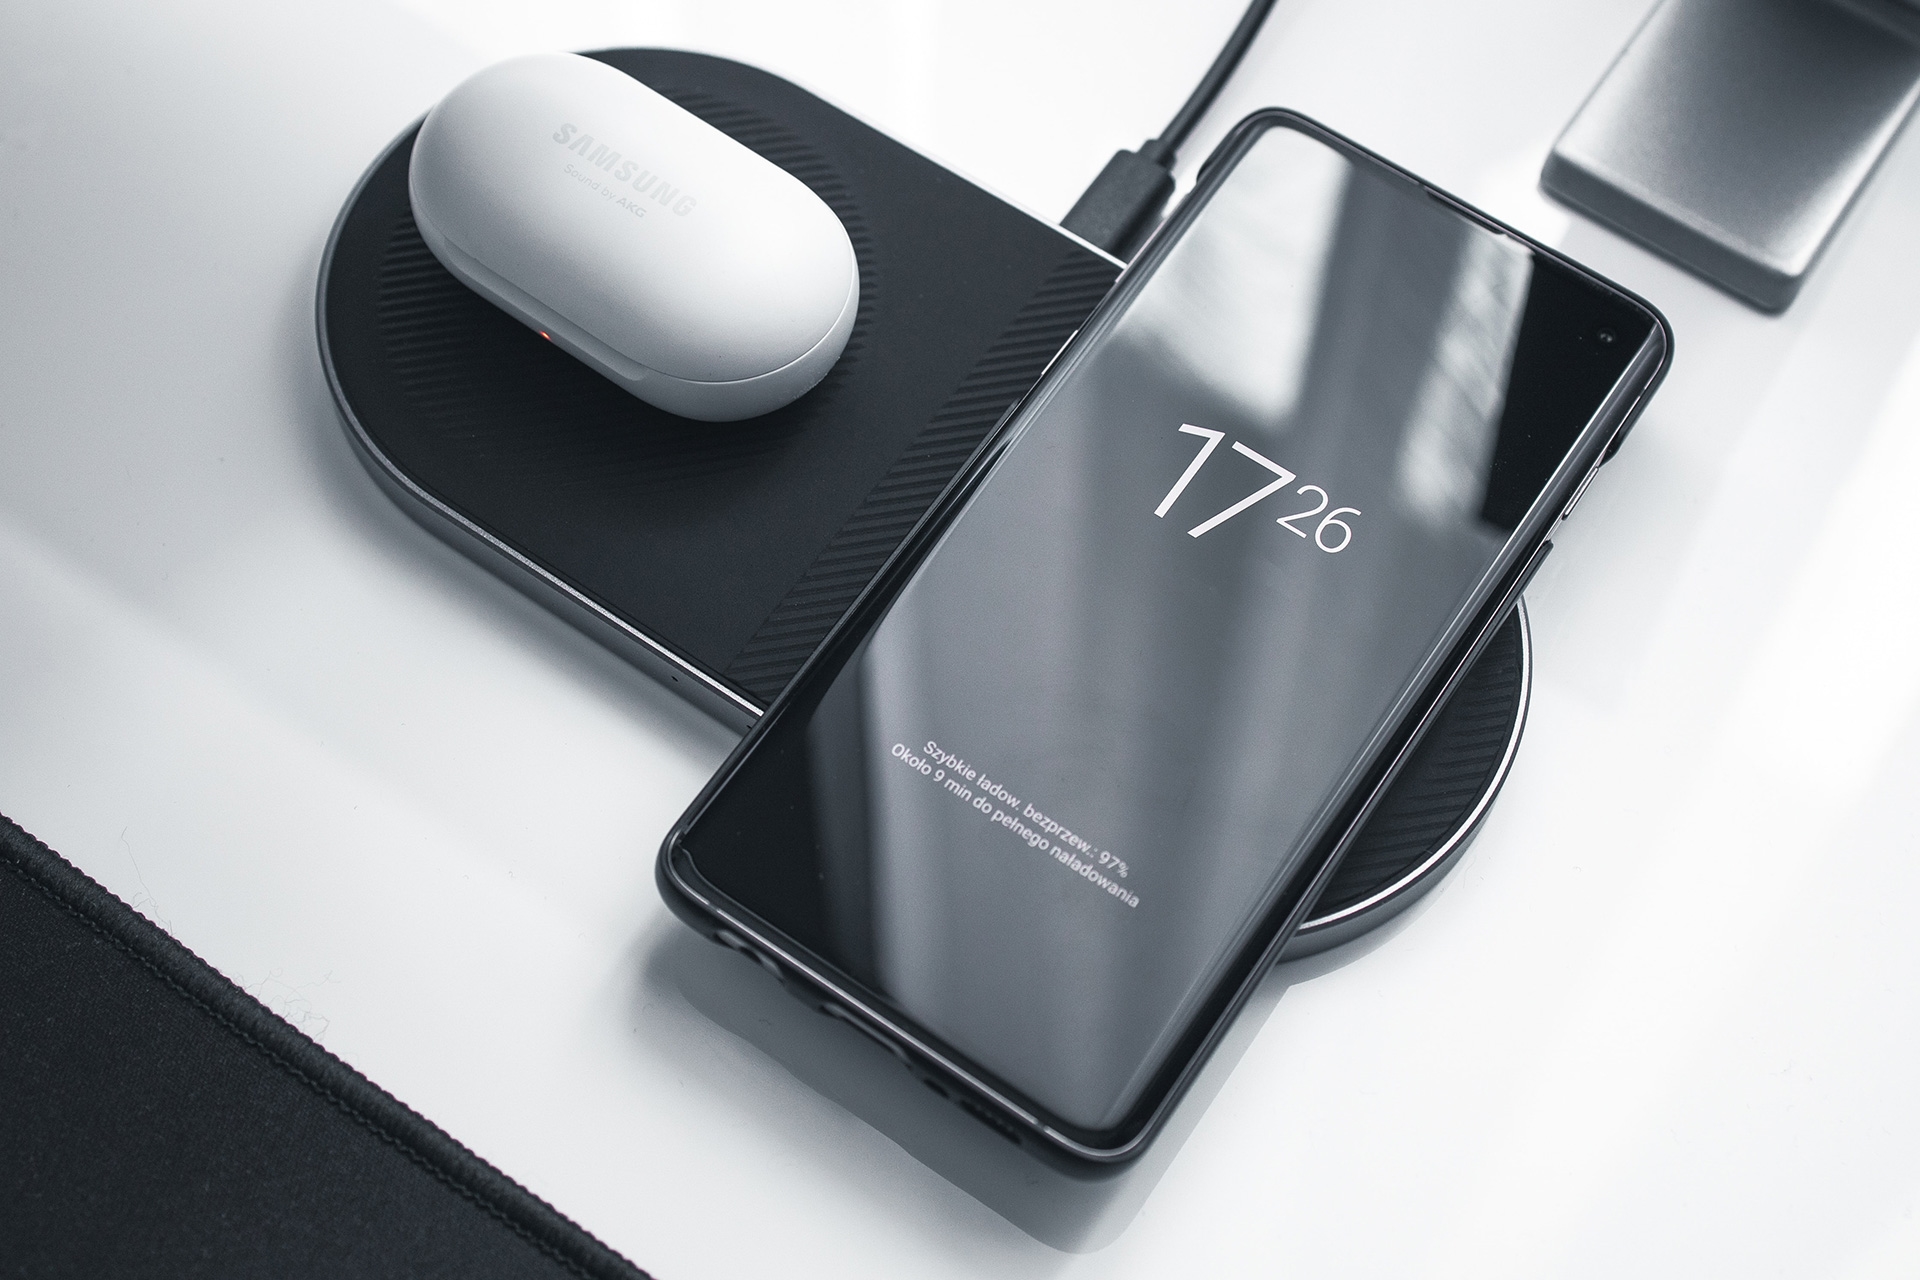 Multi-device wireless charger with Android phone and Samsung earbuds | DeviceDaily.com